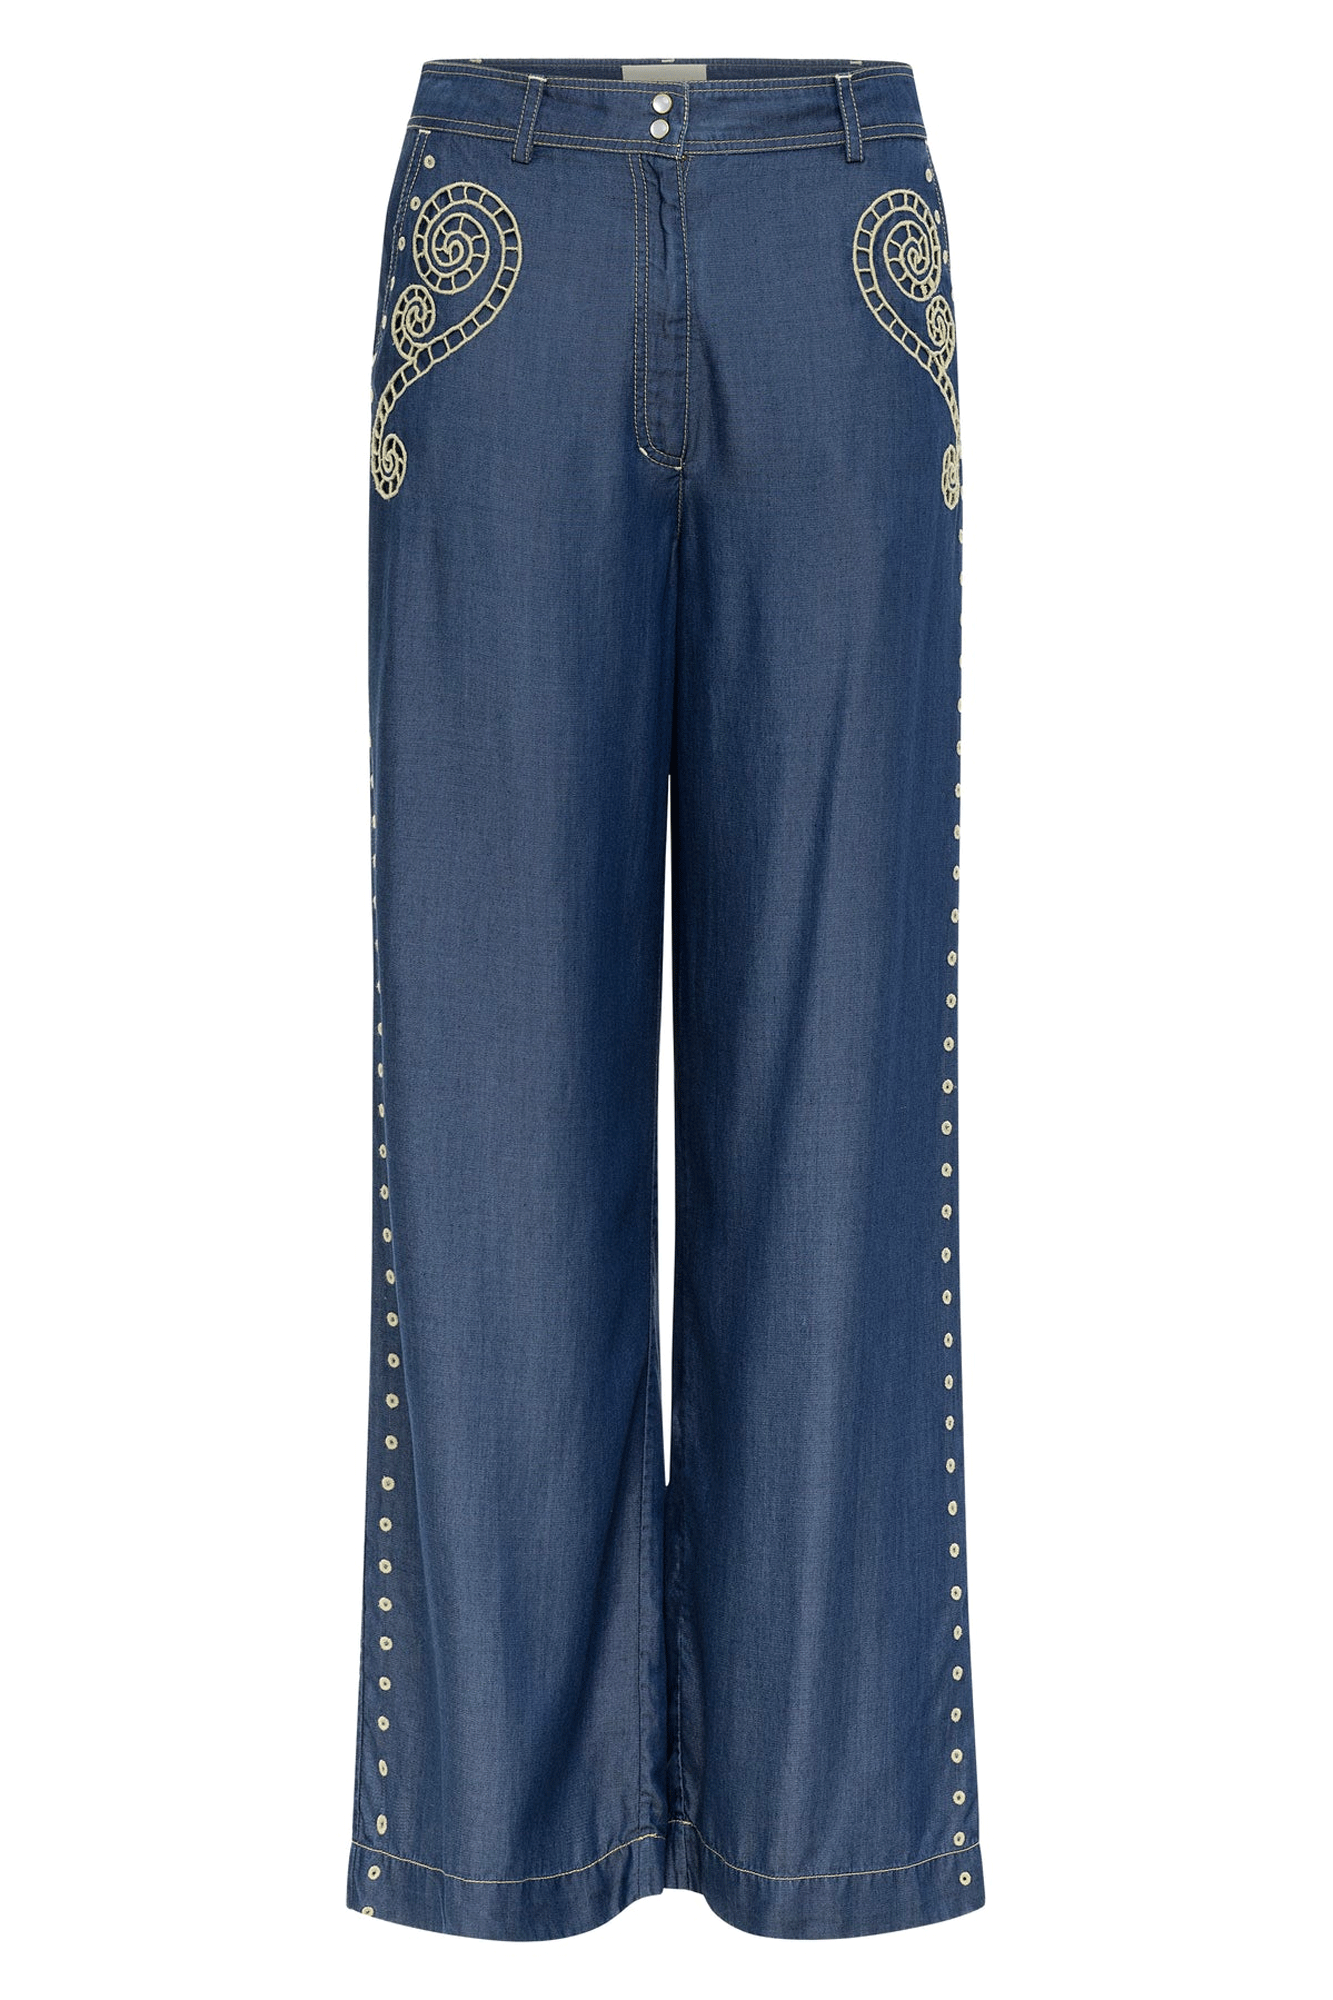 The Sam Pants are a stylish and fashion-forward choice for any modern wardrobe. Featuring a wide leg and a high-waisted design, these cropped pants provide a flattering fit that's sure to make a statement. Crafted with hand-embroidered details, these pants make a distinctly unique addition to any look.